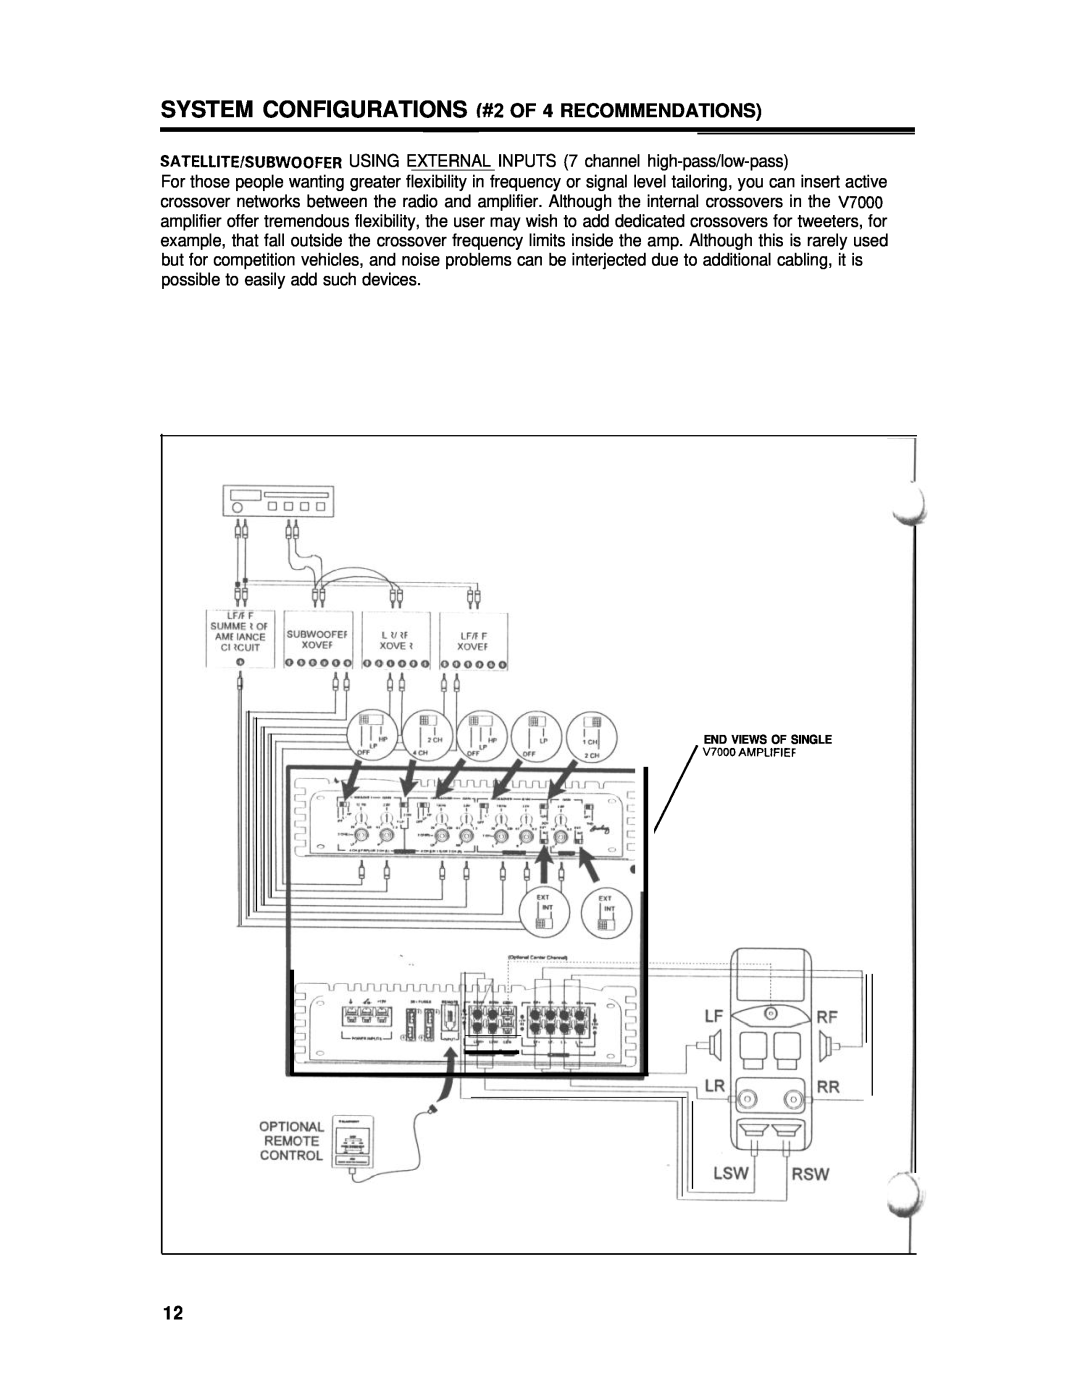 Blaupunkt manual SYSTEM CONFIGURATIONS H#2 OF 4 RECOMMENDATIONS, END VIEWS OF SINGLE V7000 AMPLIFIEF 